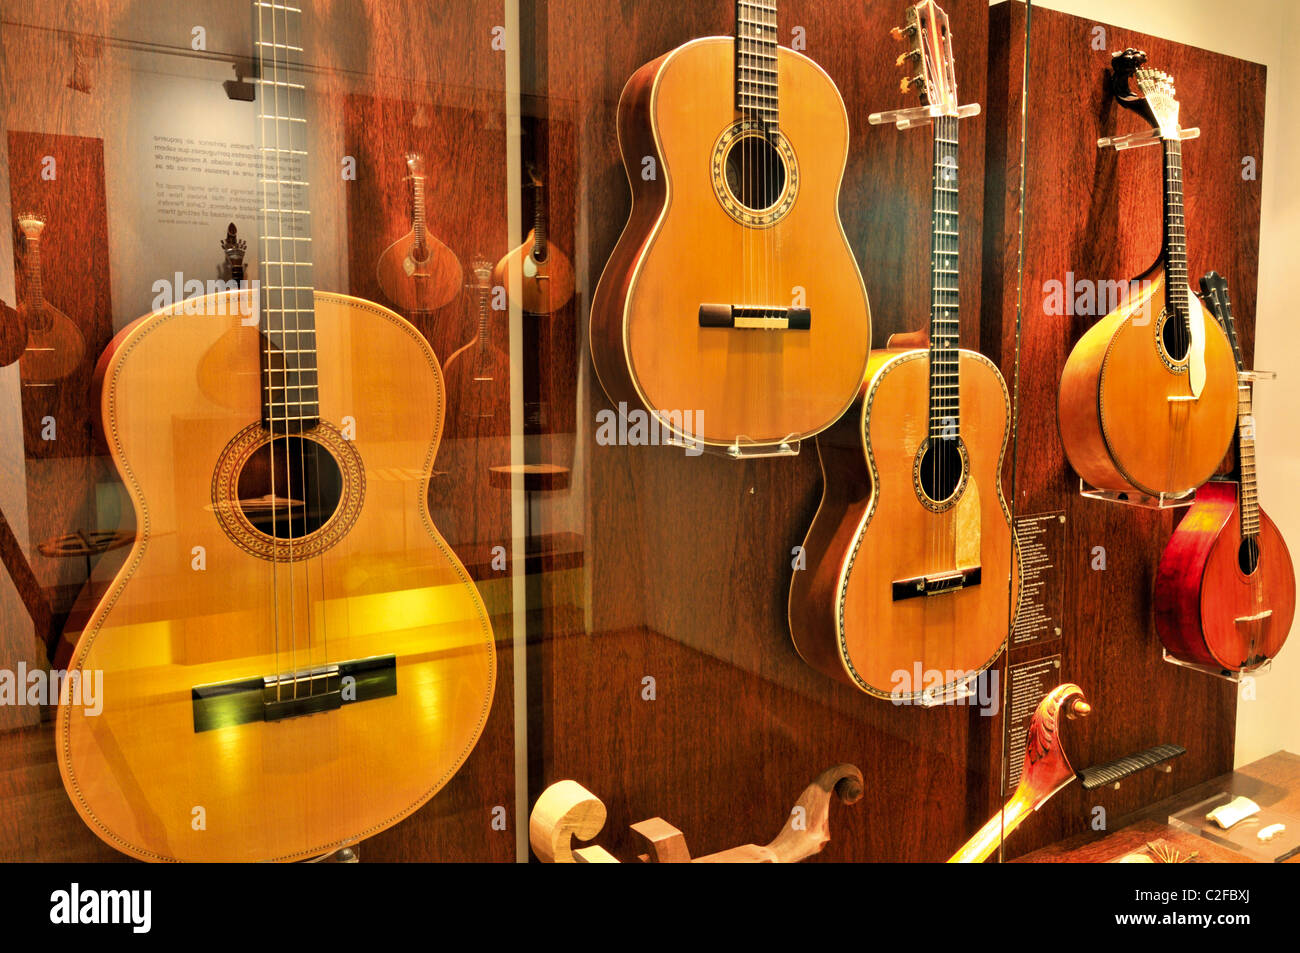 Portugal, Lisbon: Guitar exposition in the Museum of Fado Stock Photo